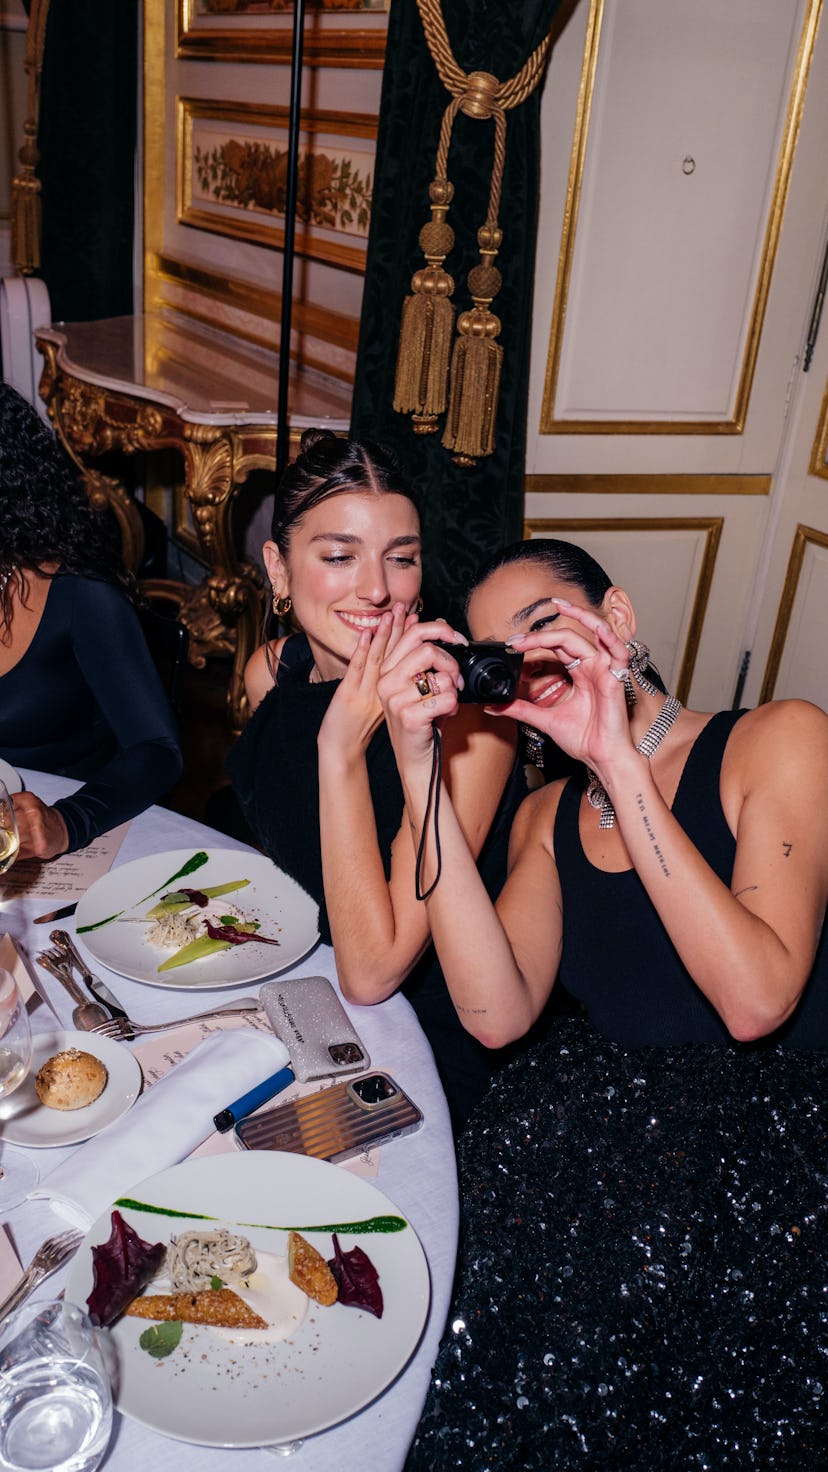 Rina and Dua Lipa celebrate Balenciaga’s Couture 51st collection dinner in Paris on July 6.